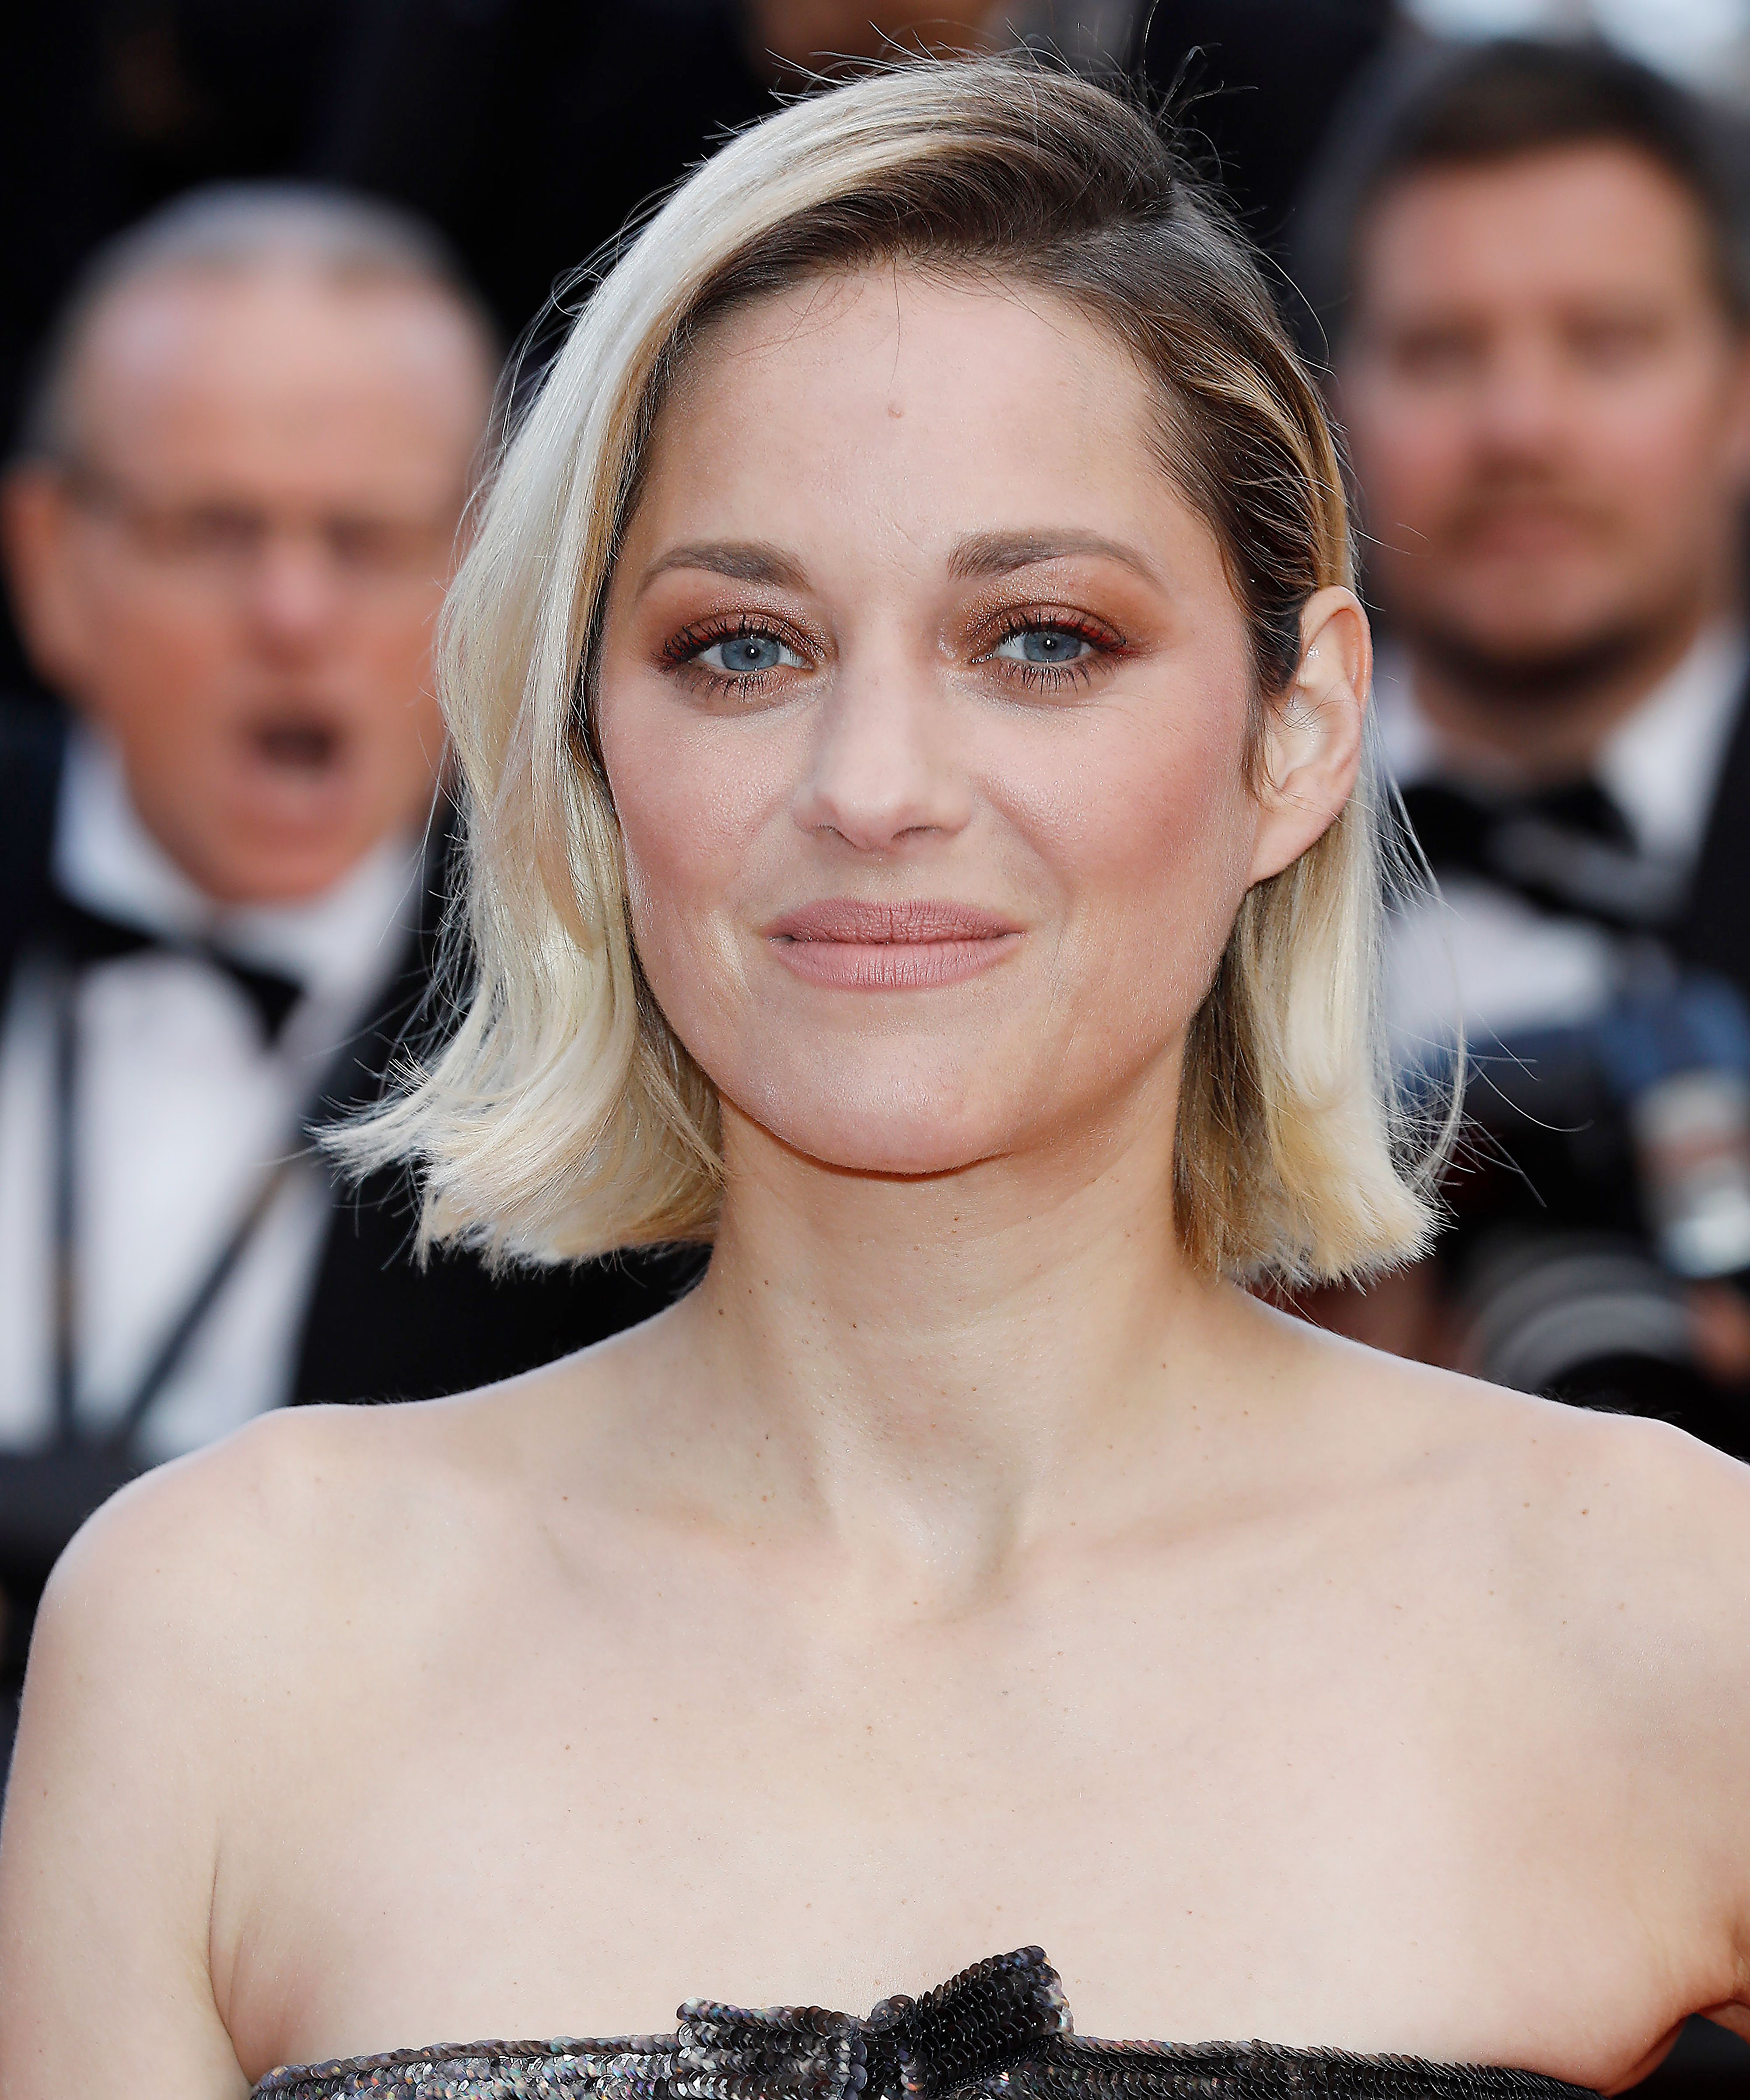 the best hairstyles at cannes don’t require any hot tools